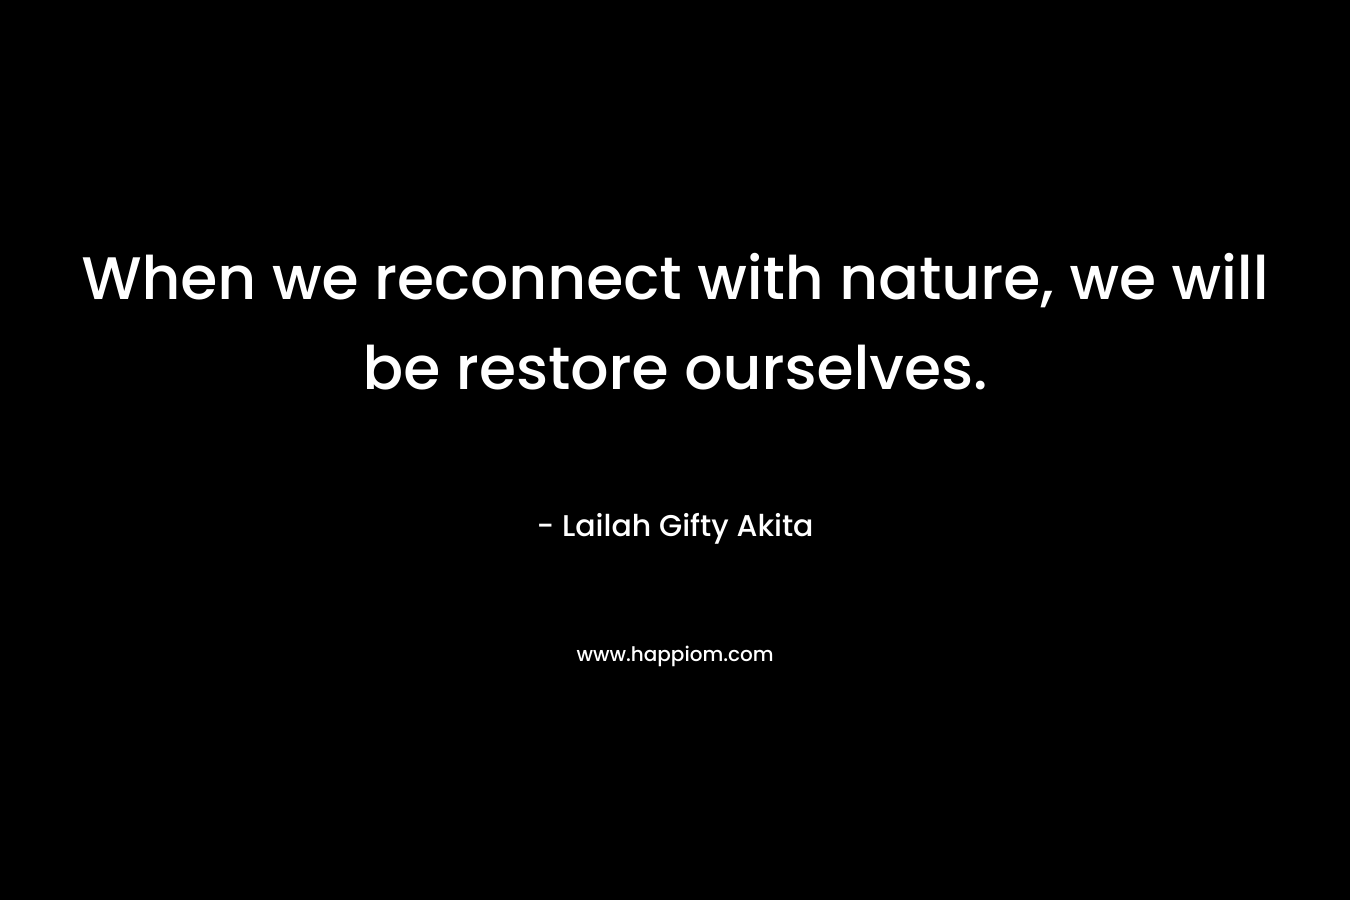 When we reconnect with nature, we will be restore ourselves.